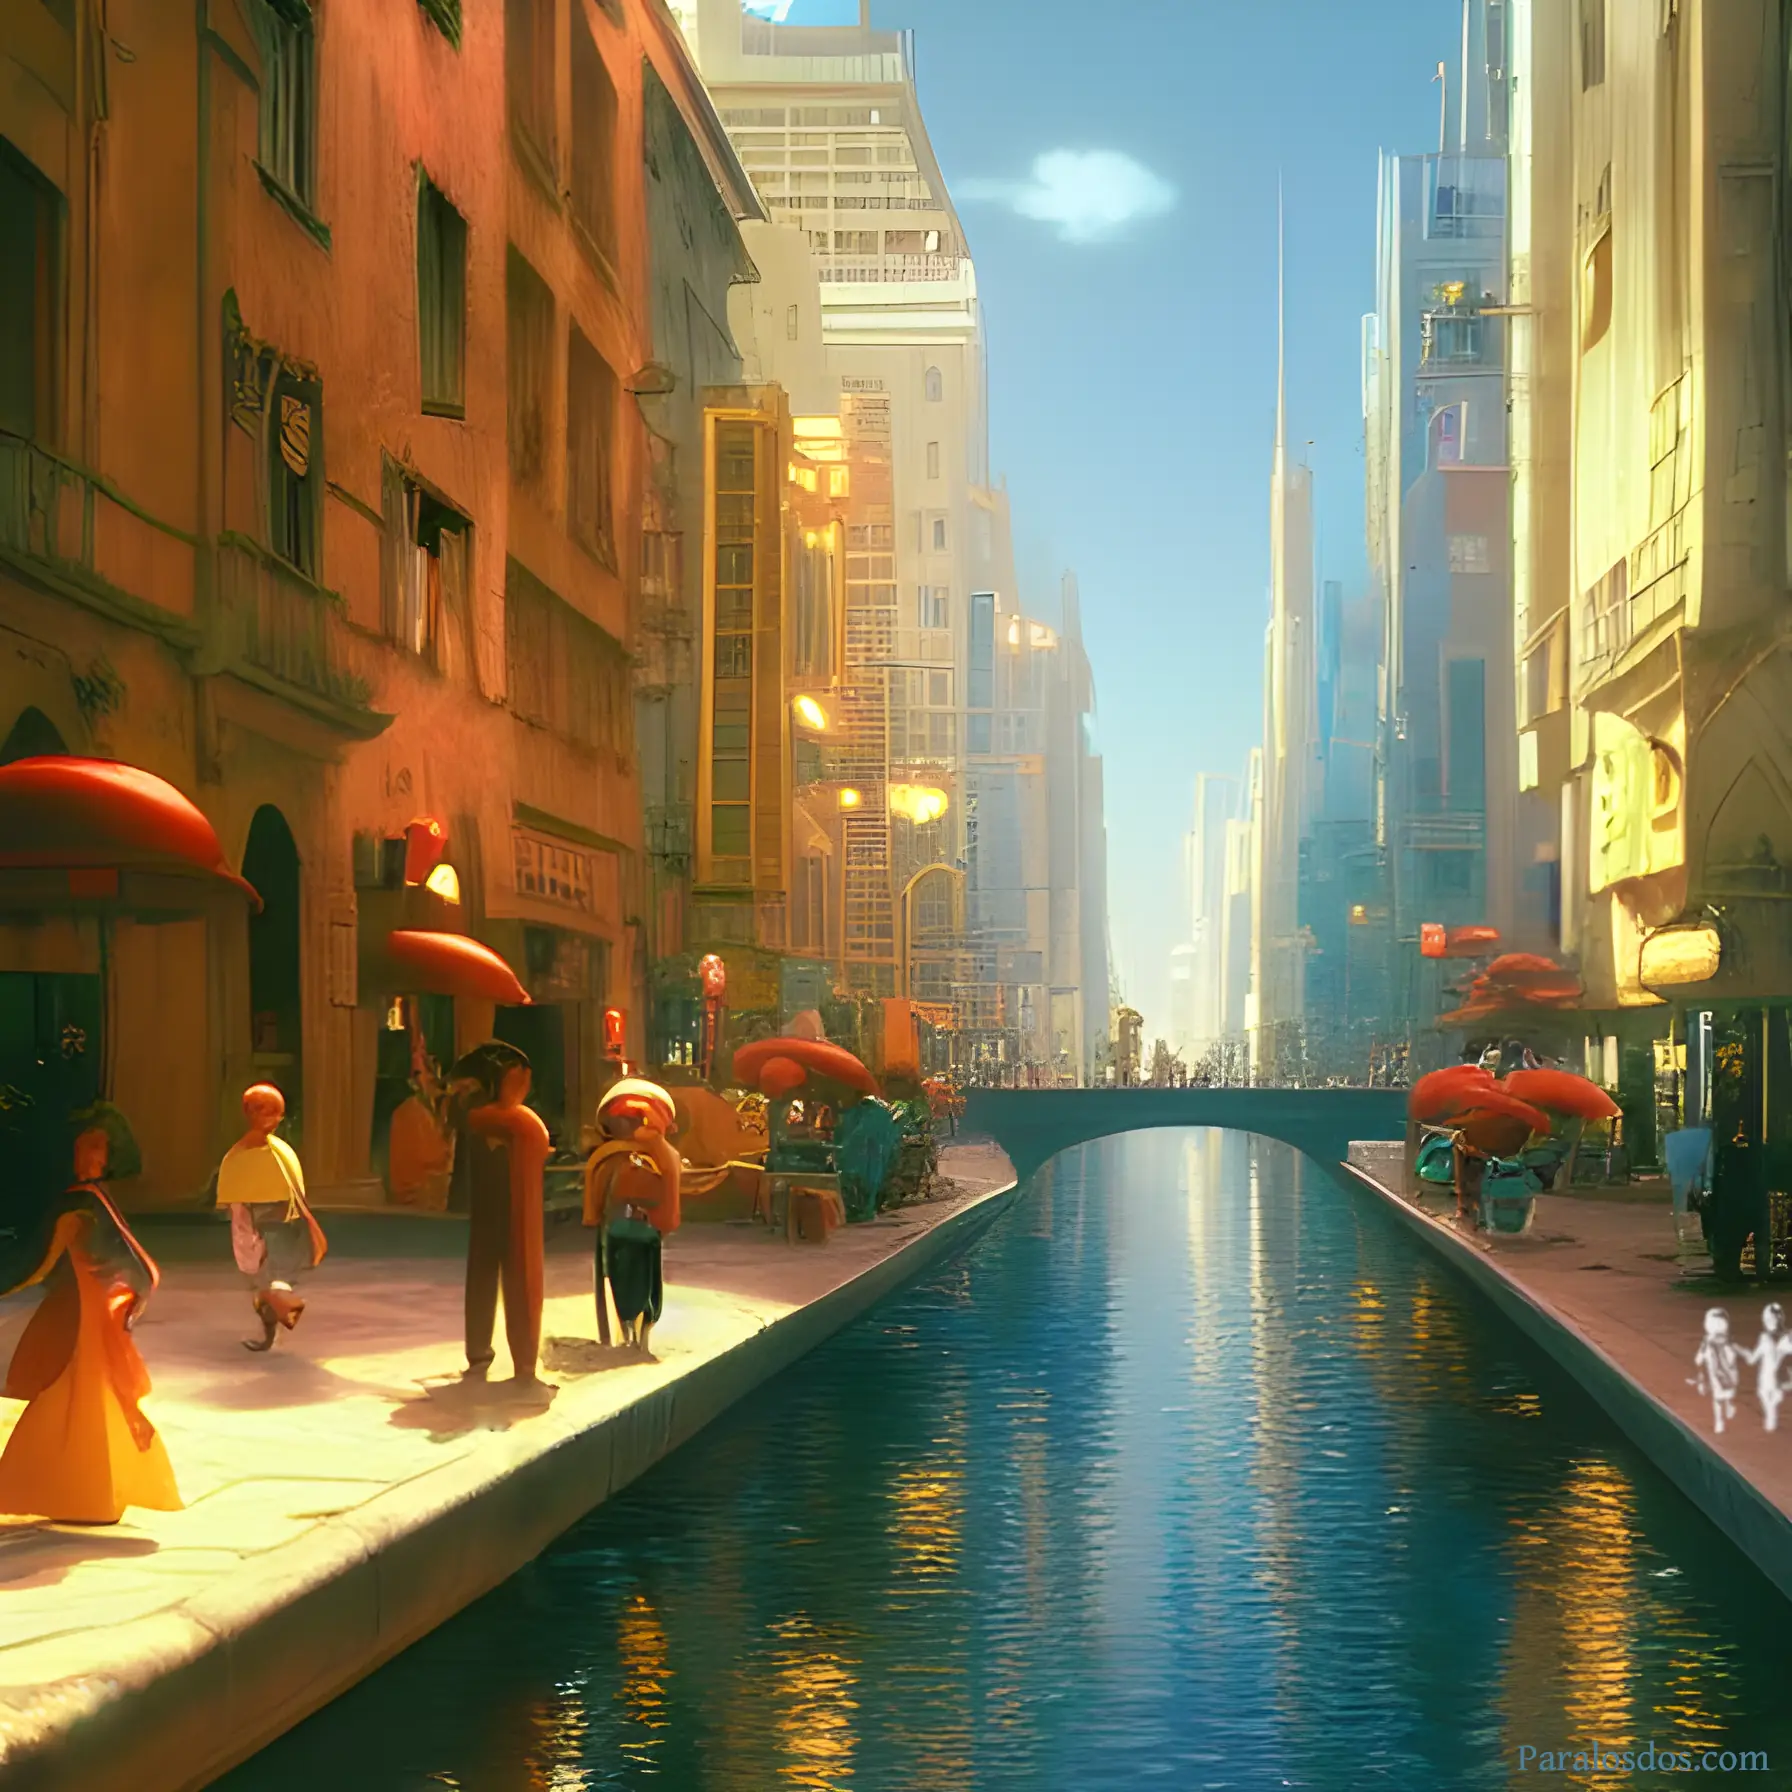 An artistic rendering of café side walks on either side of a canal in a big city.